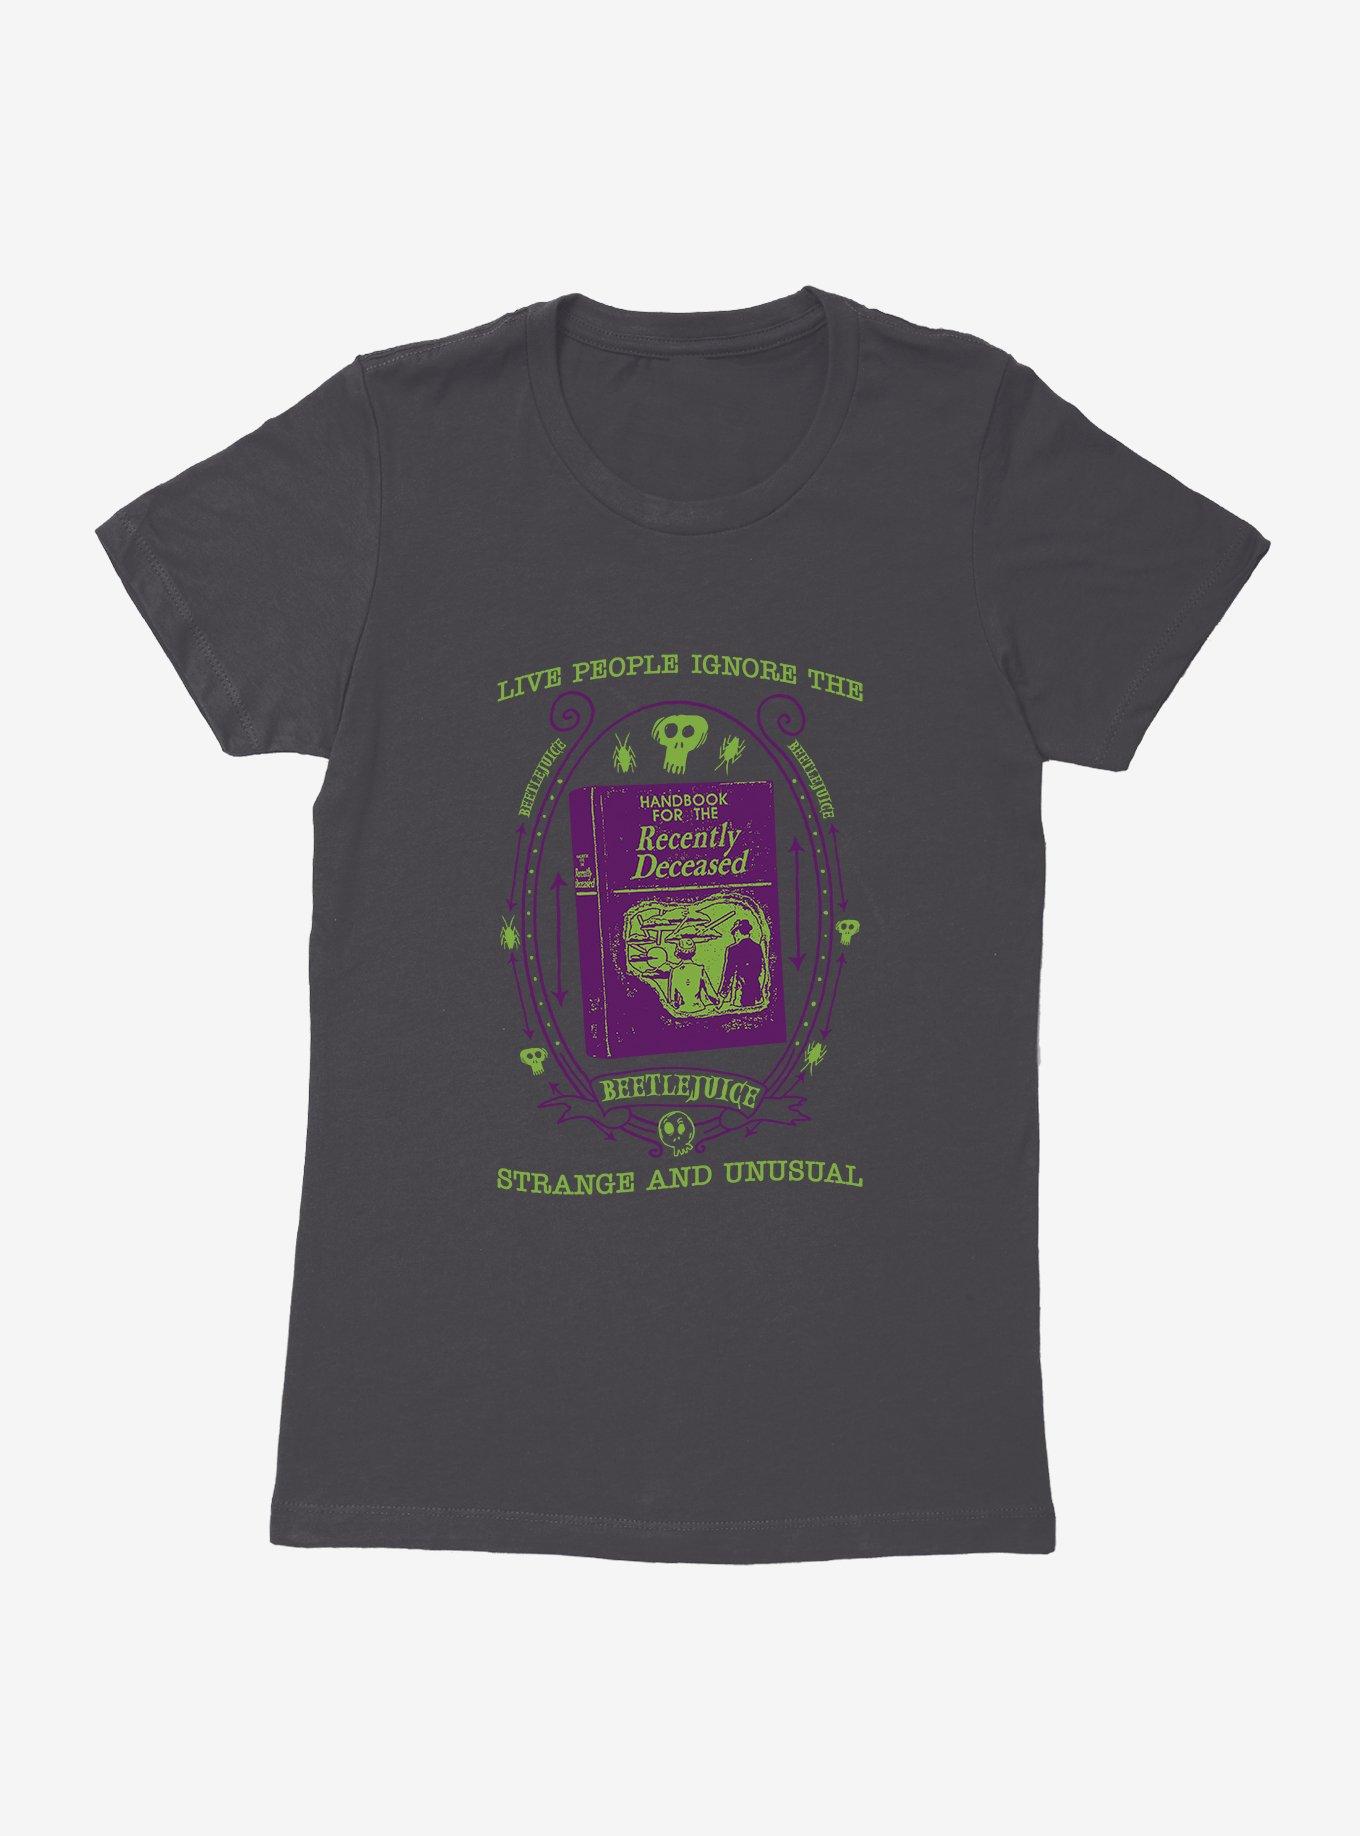 Beetlejuice Live People Ignore The Strange And Unusual Womens T-Shirt, , hi-res